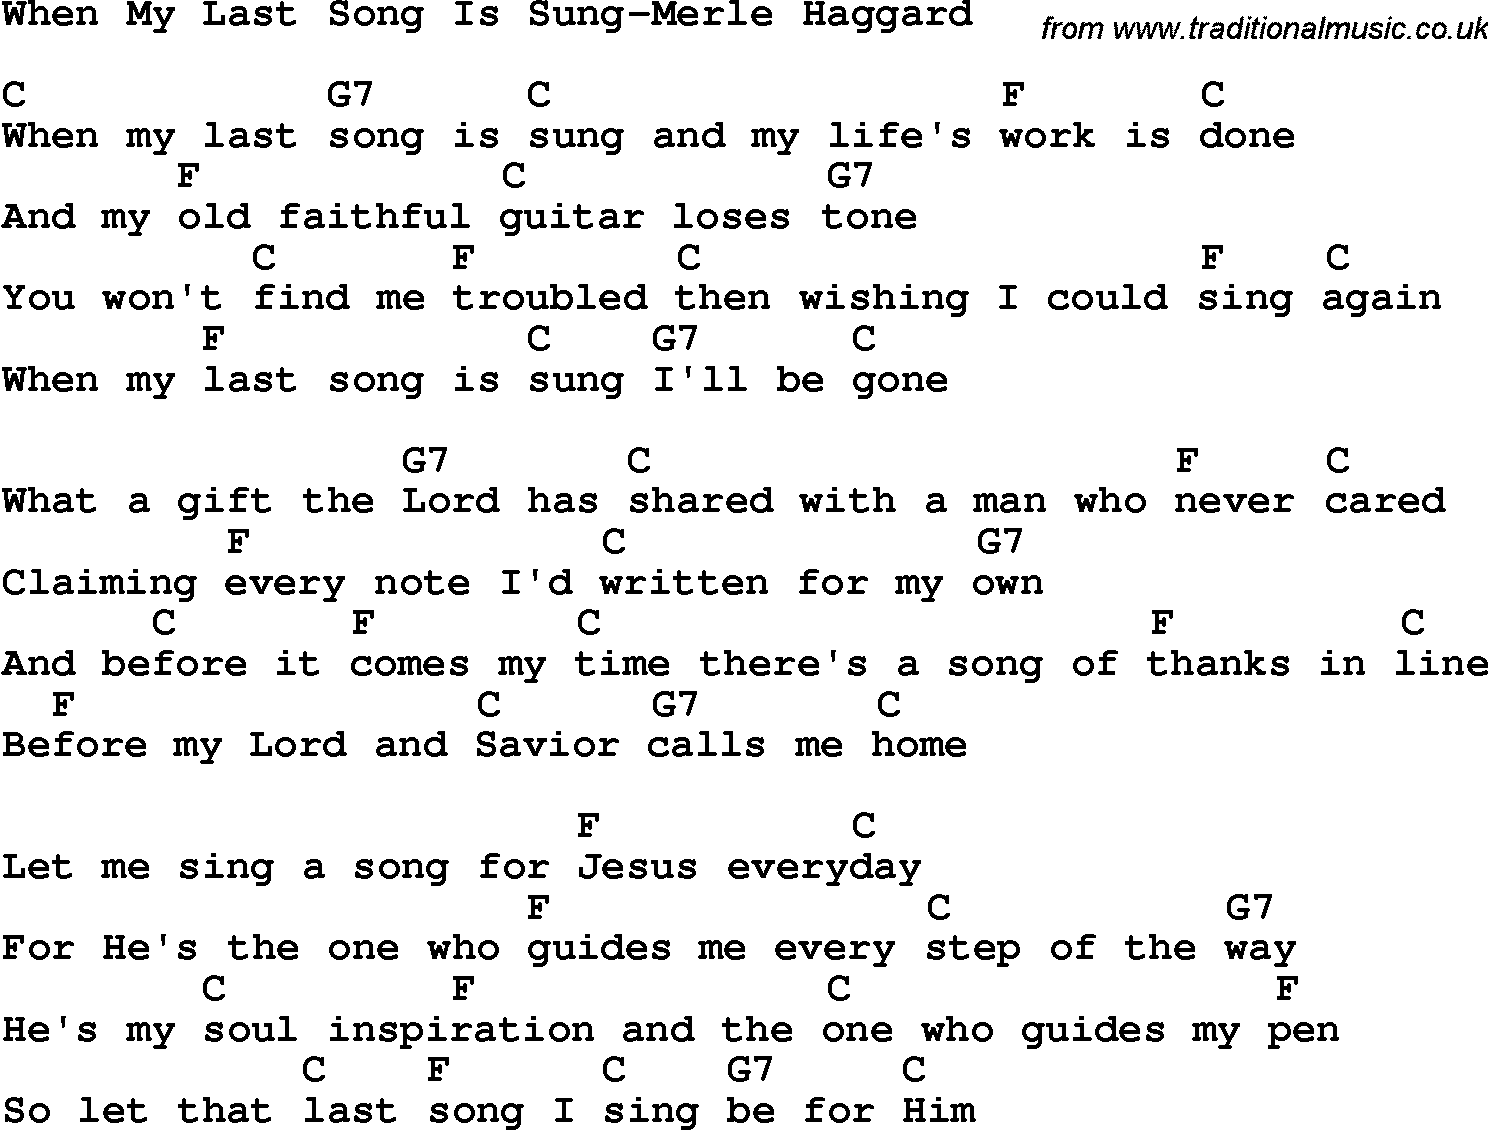 Country, Southern and Bluegrass Gospel Song When My Last Song Is Sung-Merle Haggard lyrics and chords